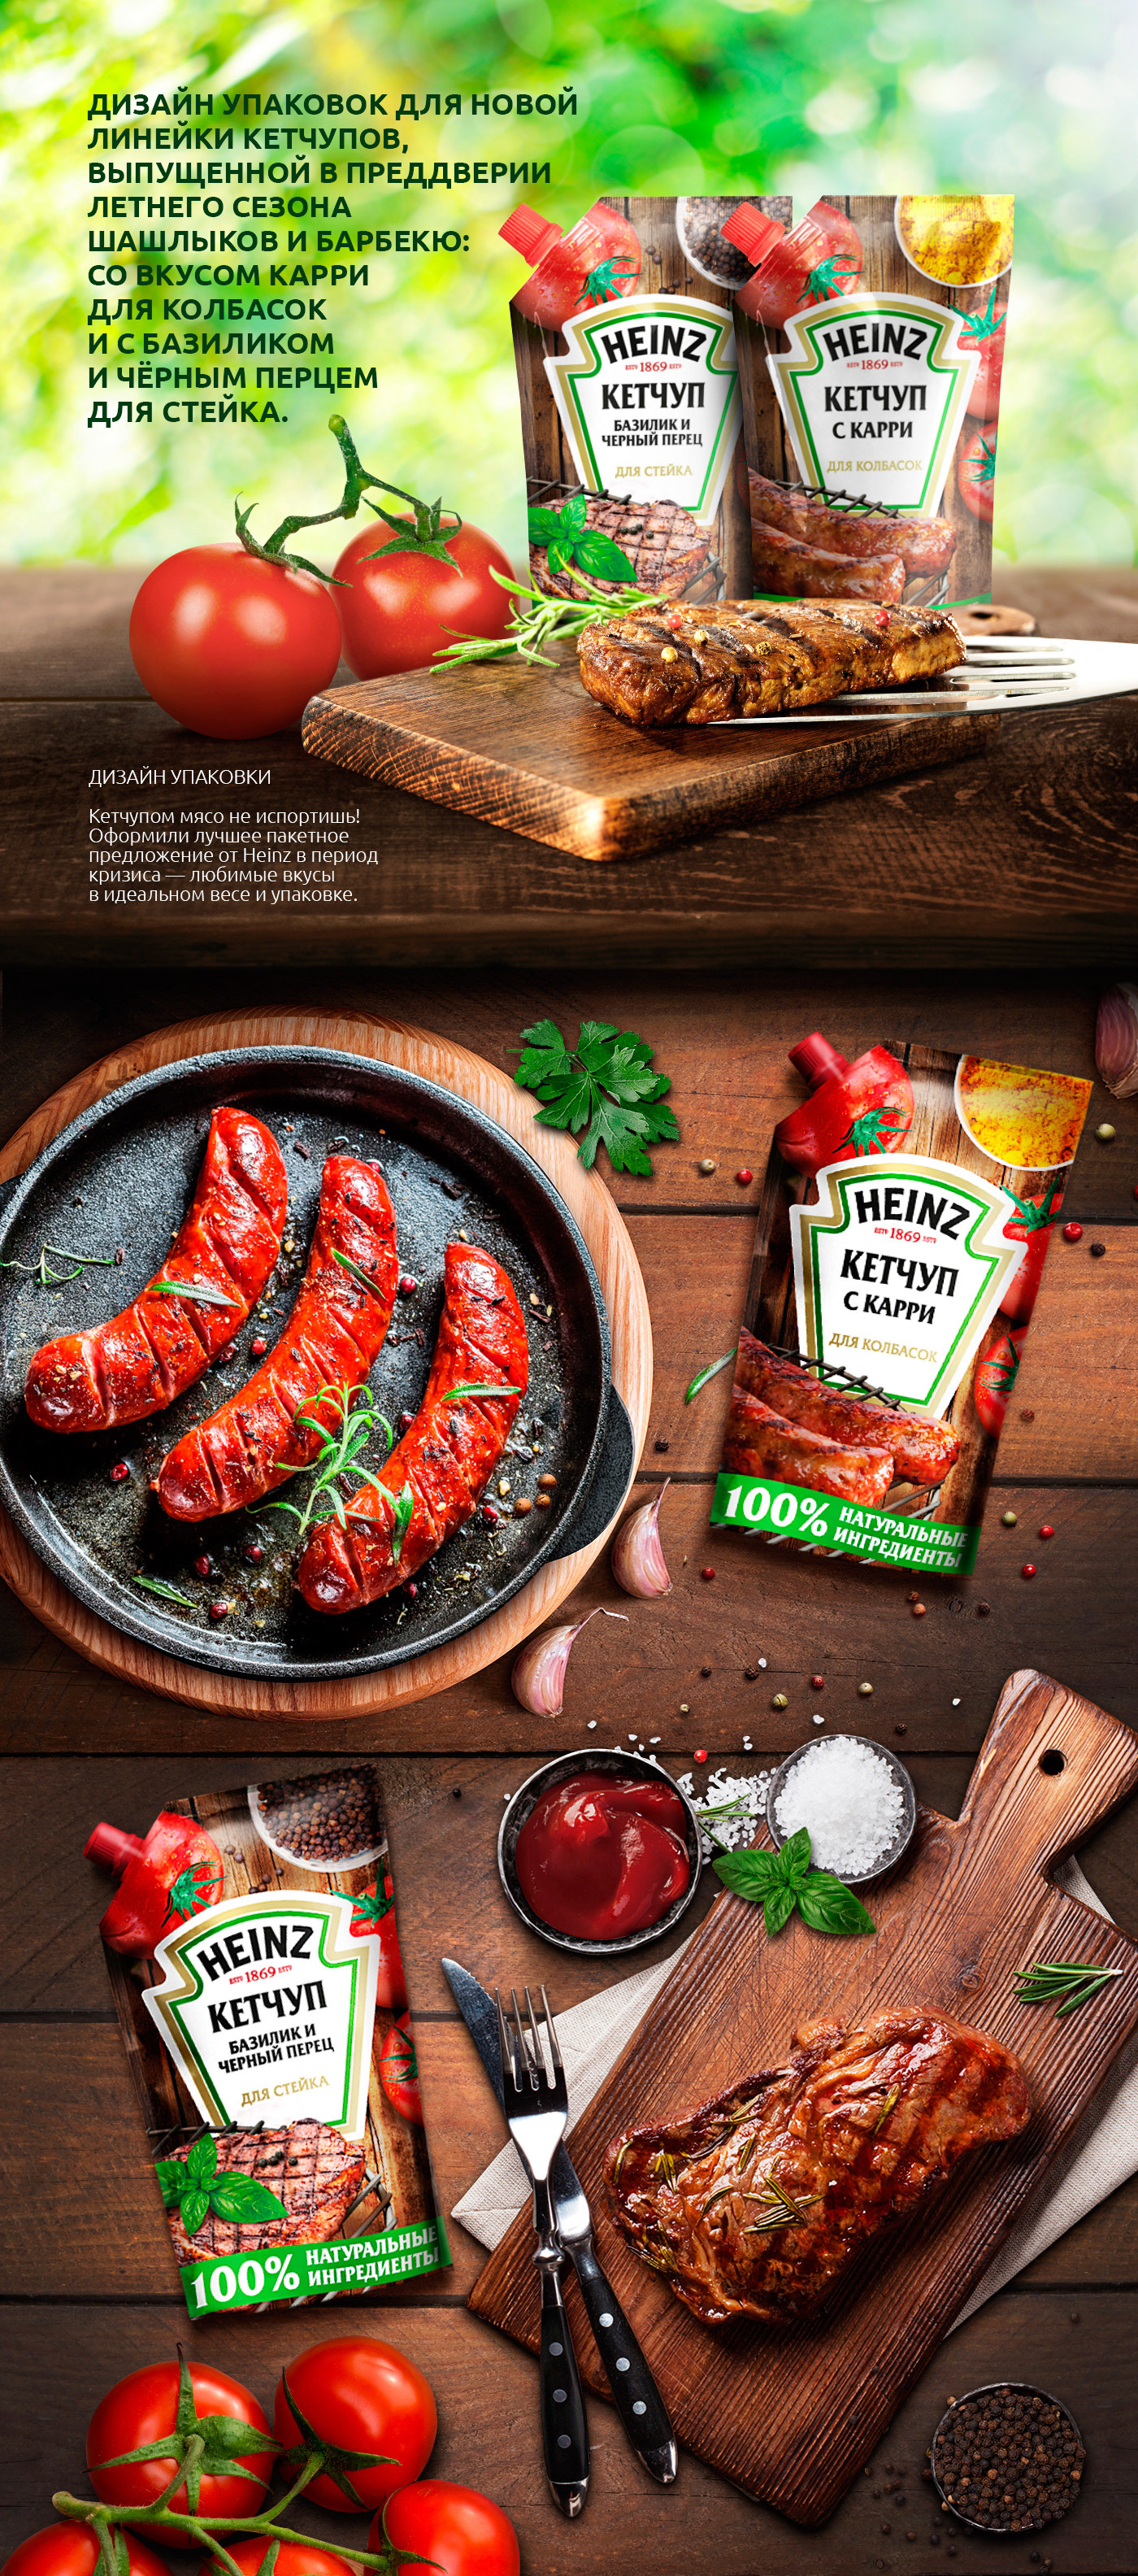 heinz package ketchup picnic photo retouch Food 